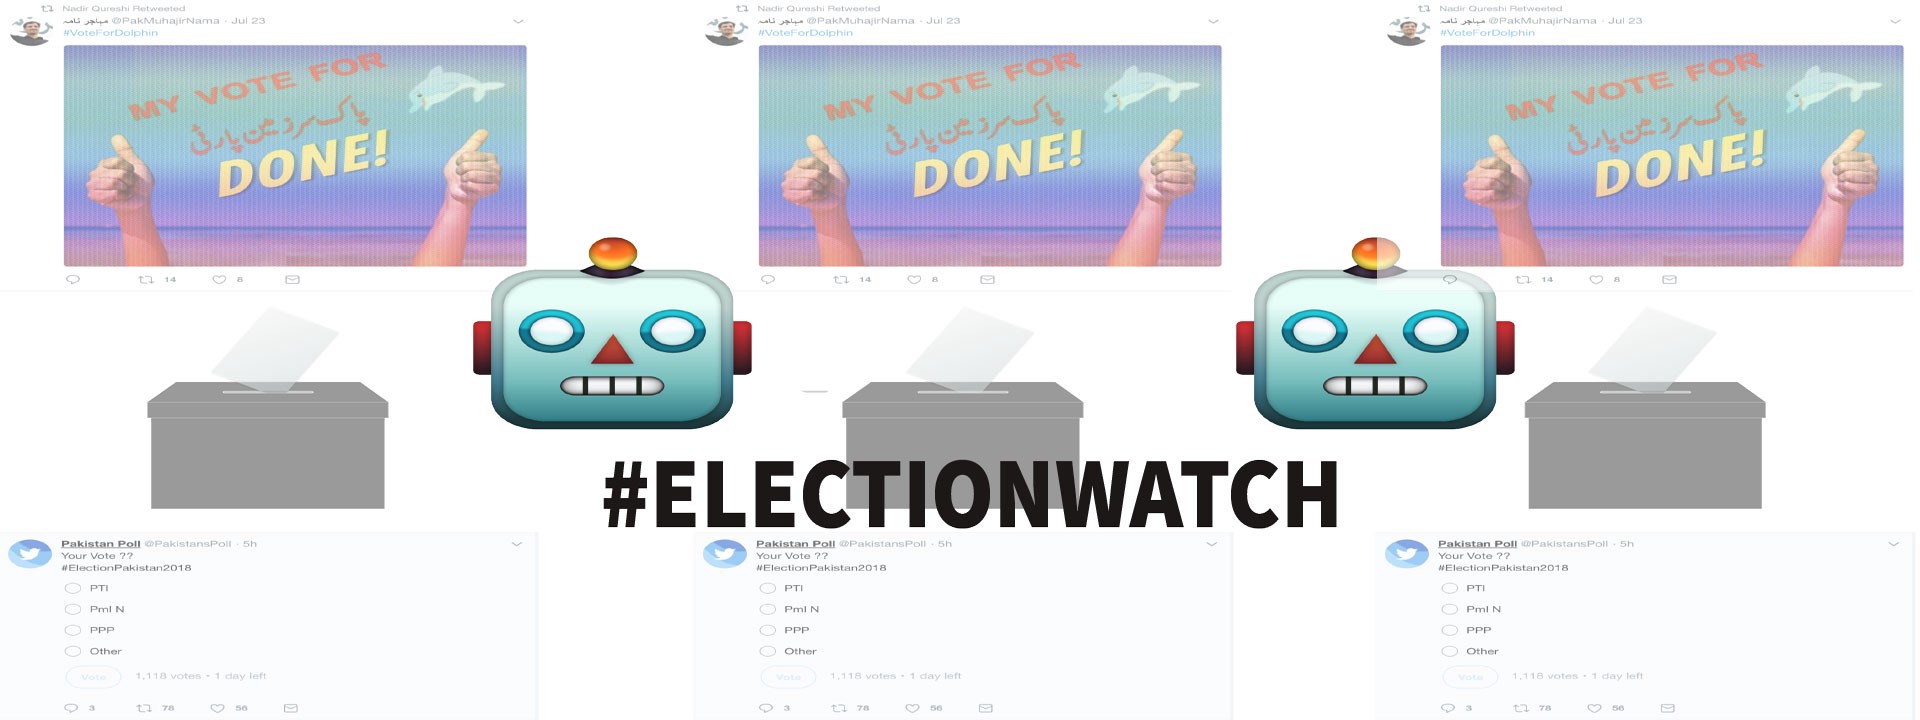 #ElectionWatch: Bots and Biased Polls in Pakistani Elections